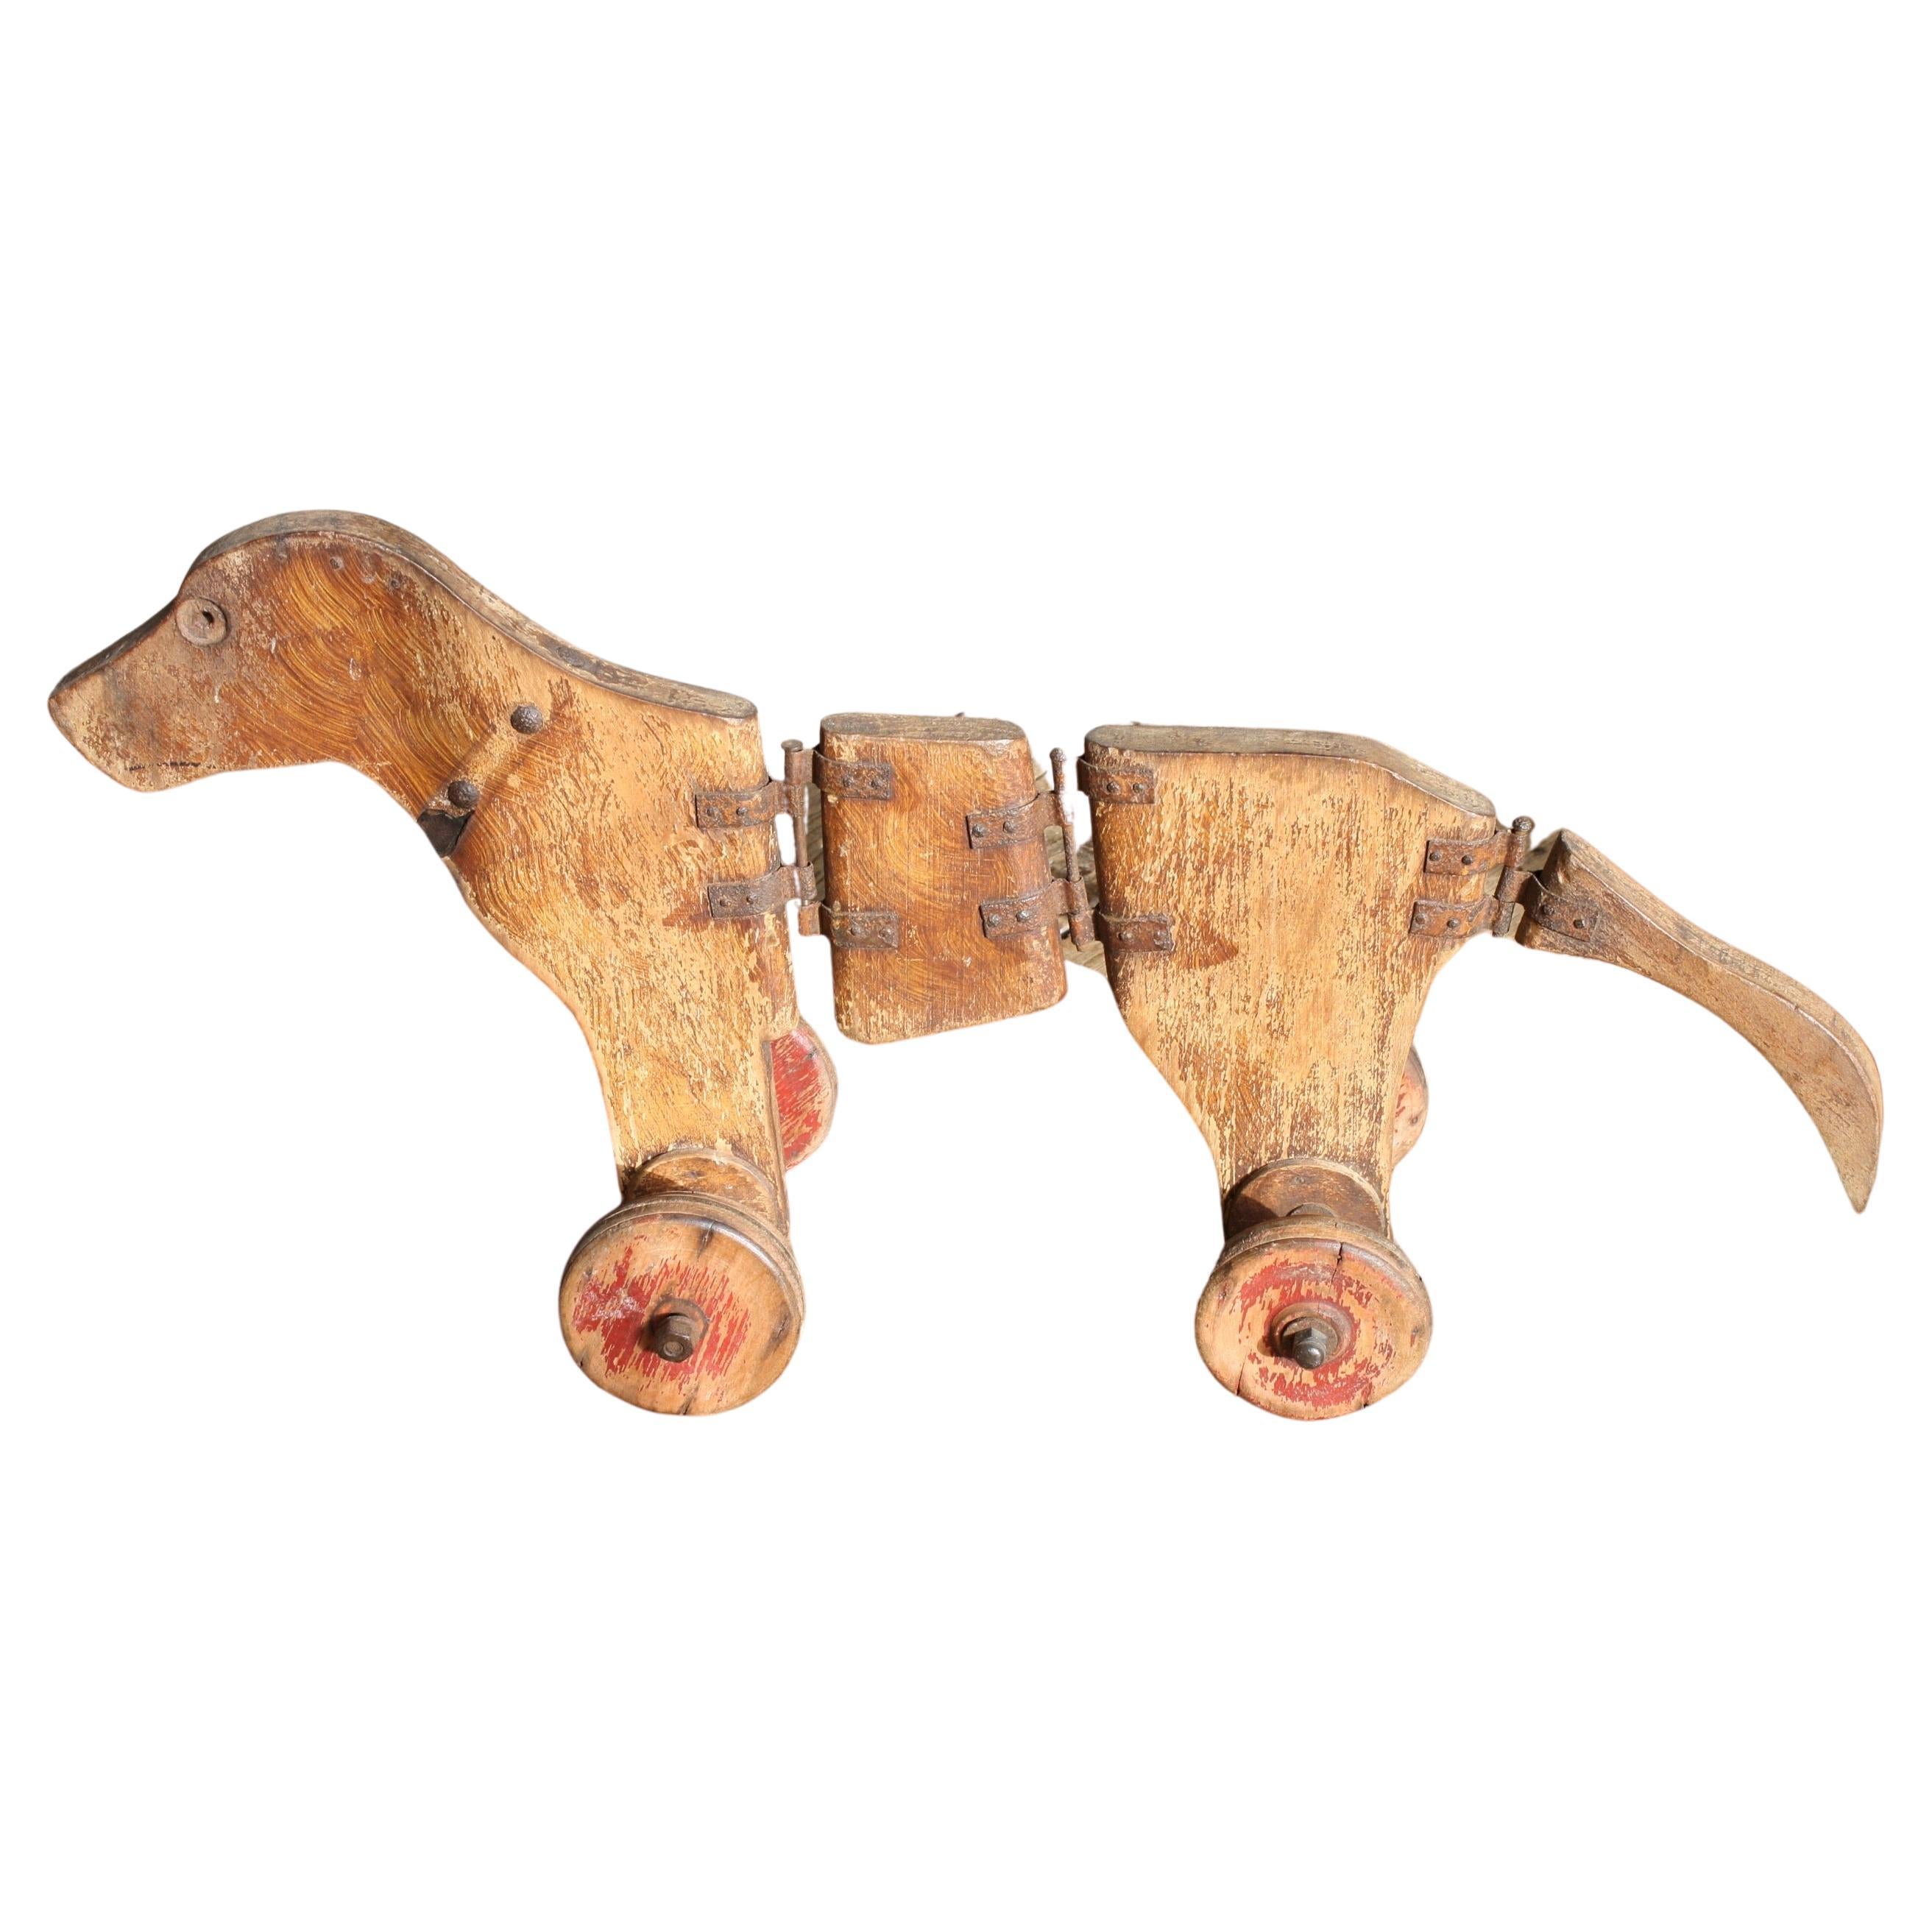 Late 18th / Early 19th Georgian Articulated Toy Pull Along Dog Folk Art